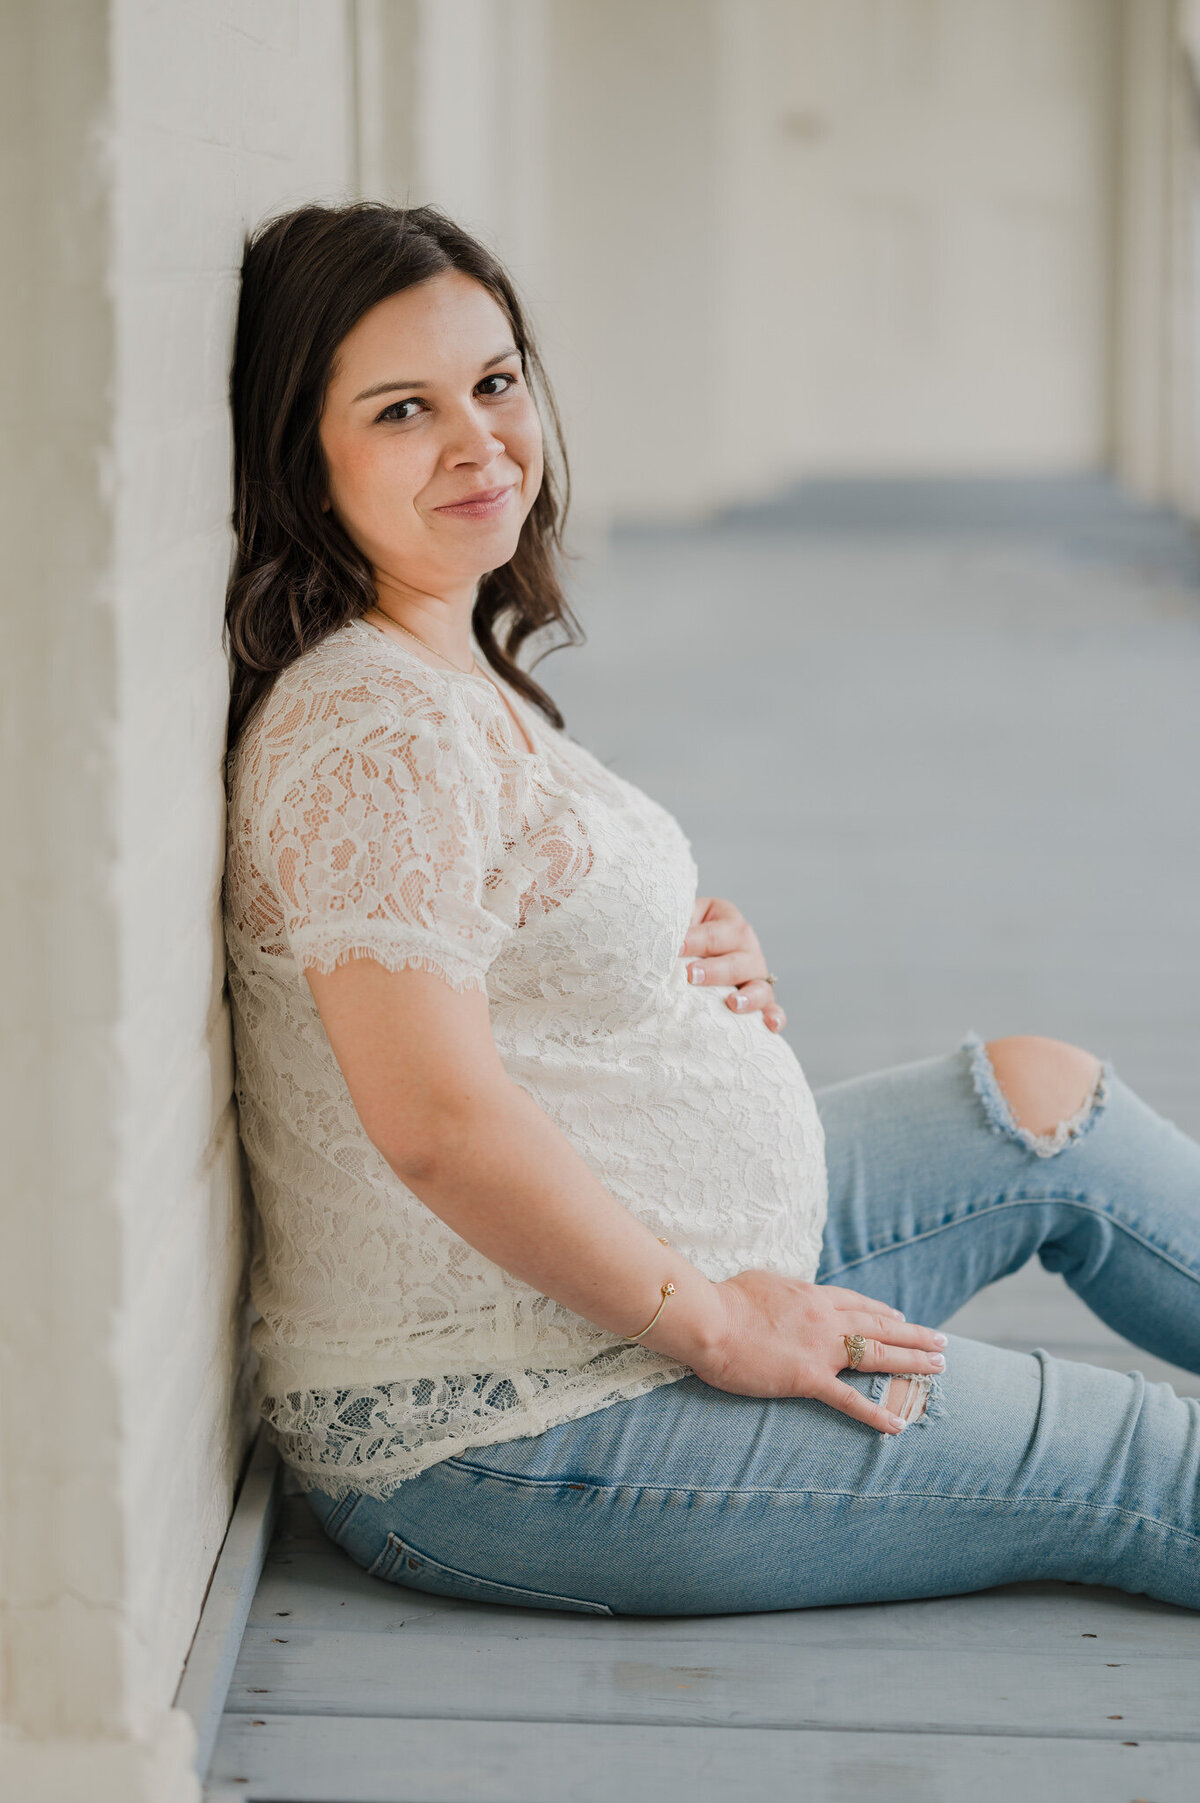 Pregnant brunette in jeans and a lace shirt sits and smiles at the camera during maternity pictures.